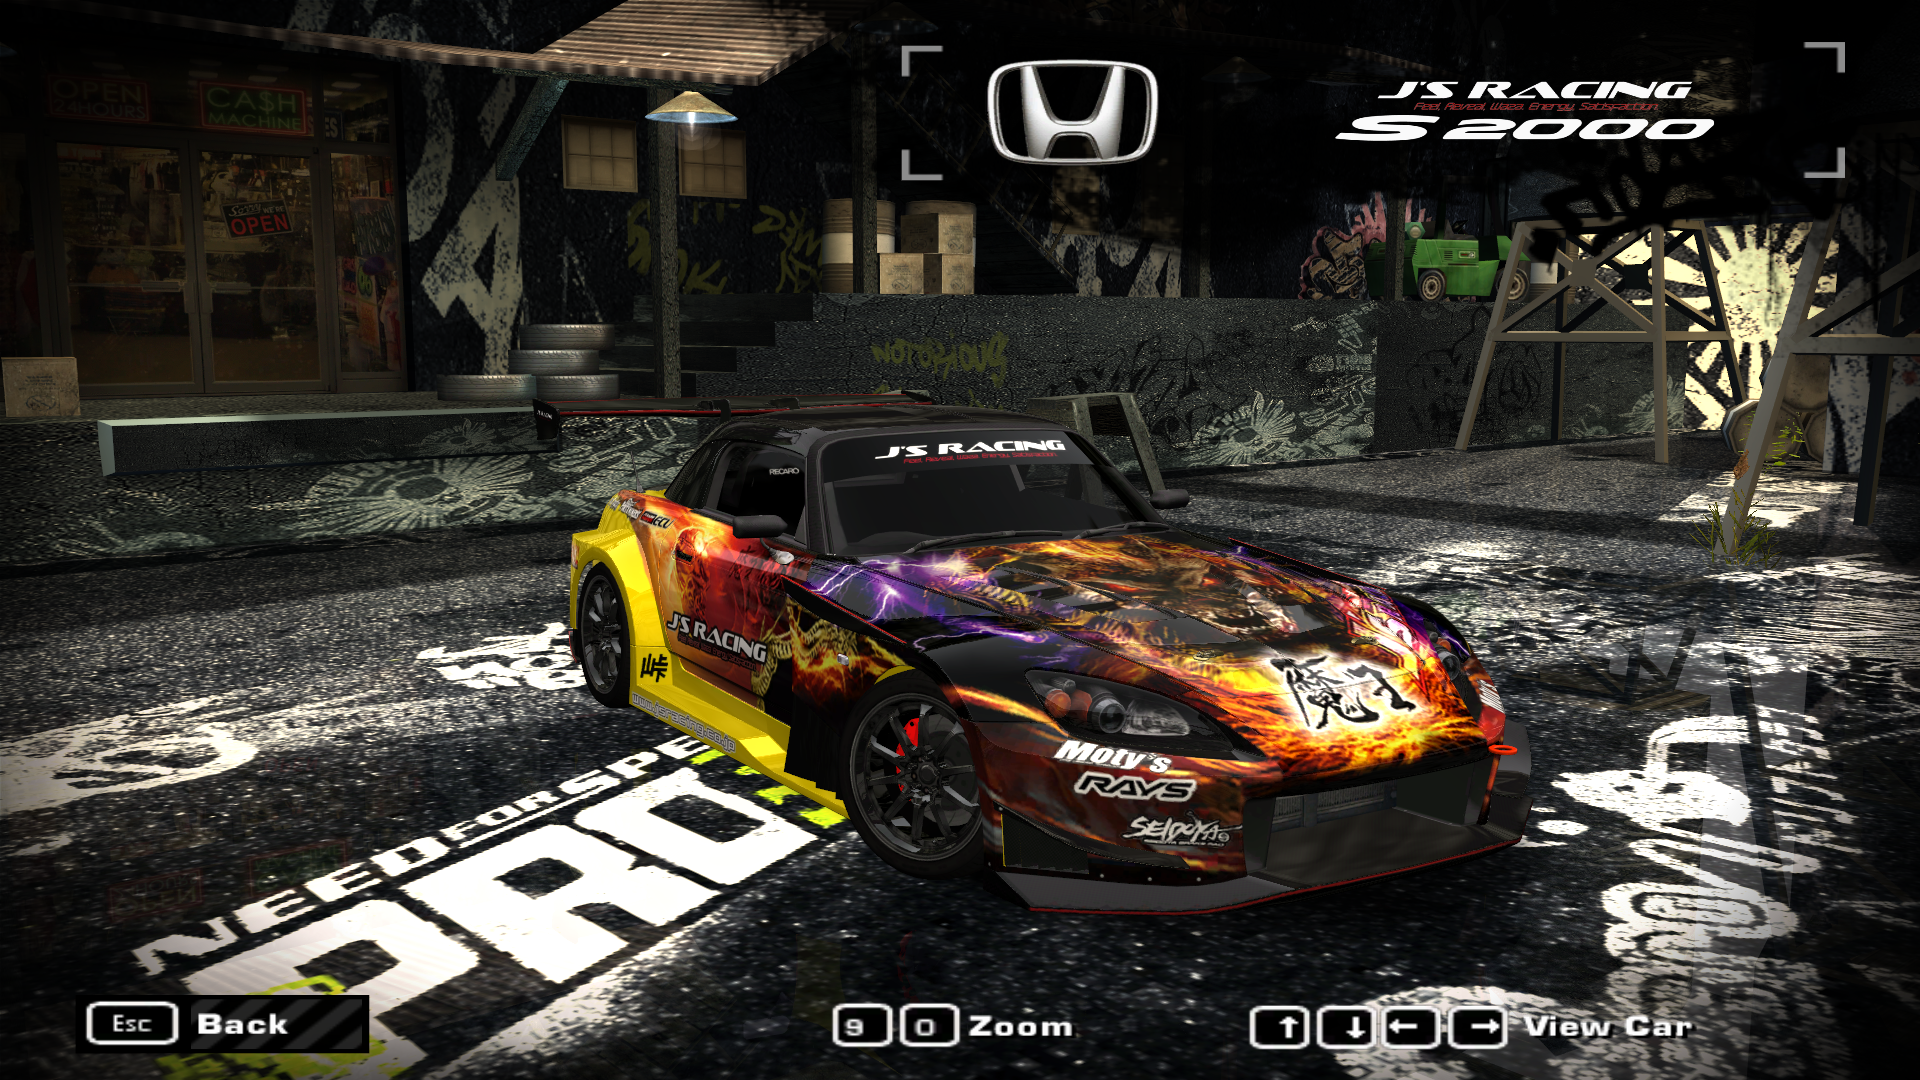 Need For Speed Most Wanted Honda J's RACING Maou S2000